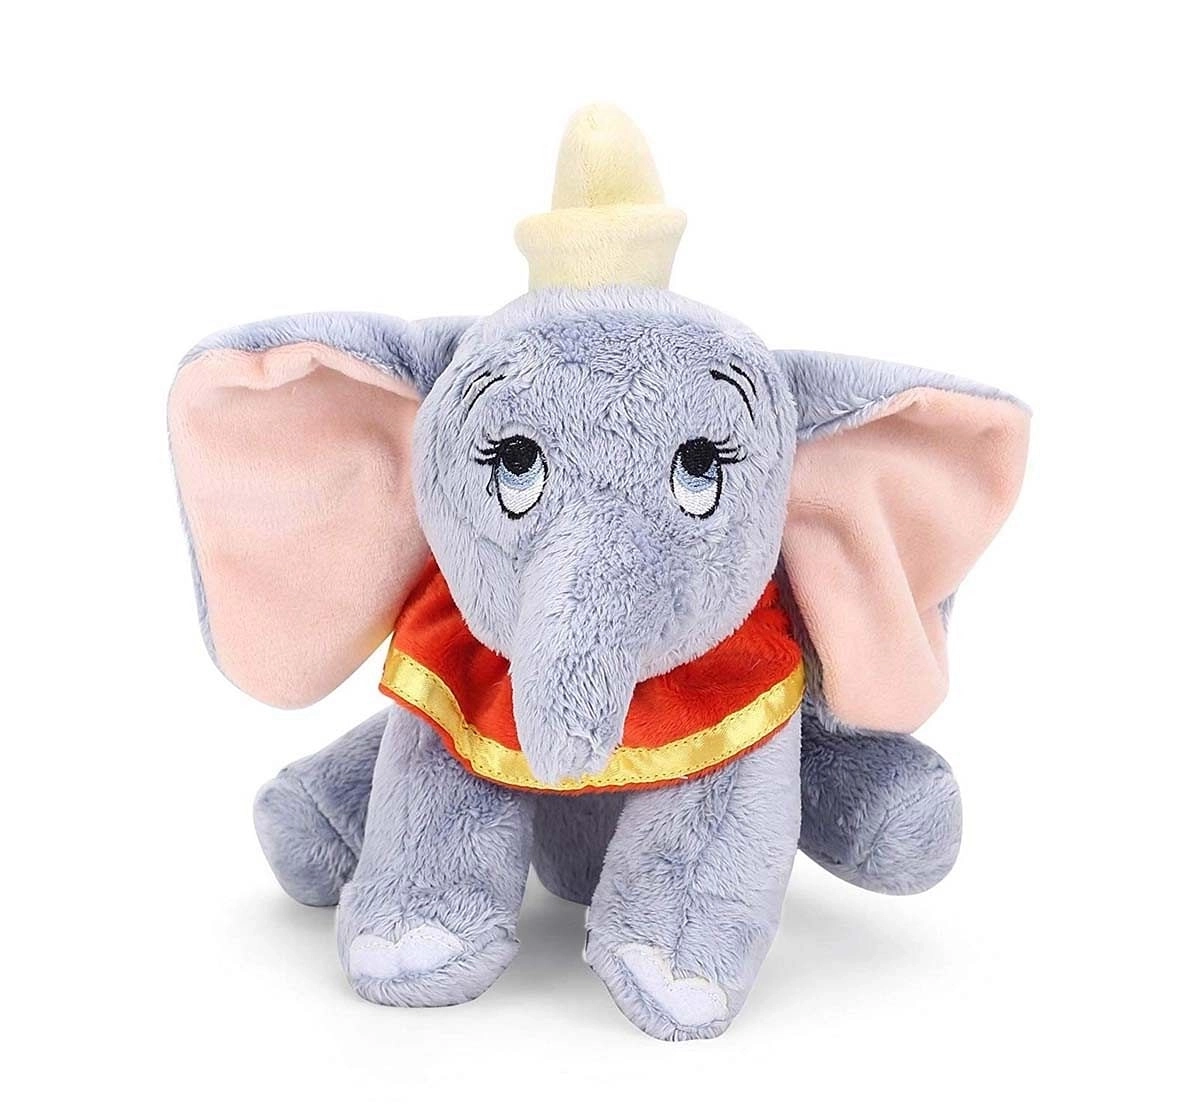 Disney Dumbo Plush, Multi Color, 9 Inch Character Soft Toys for Kids age 0M+ 23 Cm 